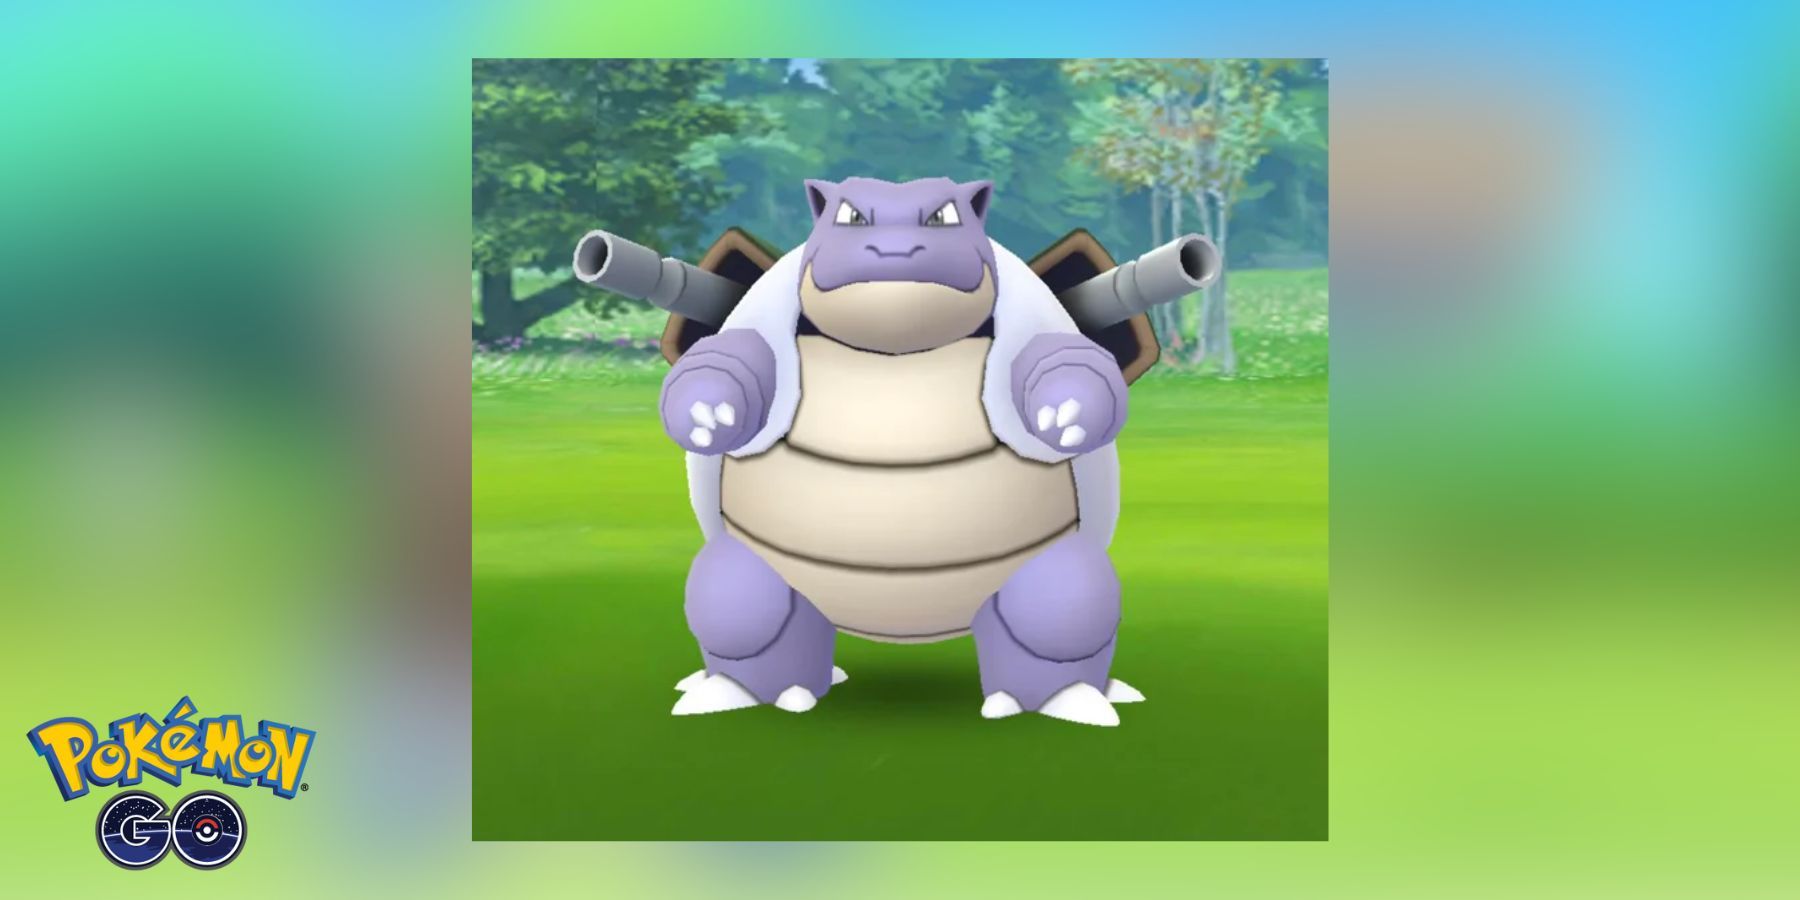 Guide] Best raid counters, moves, and skillsets for Kangaskhan and